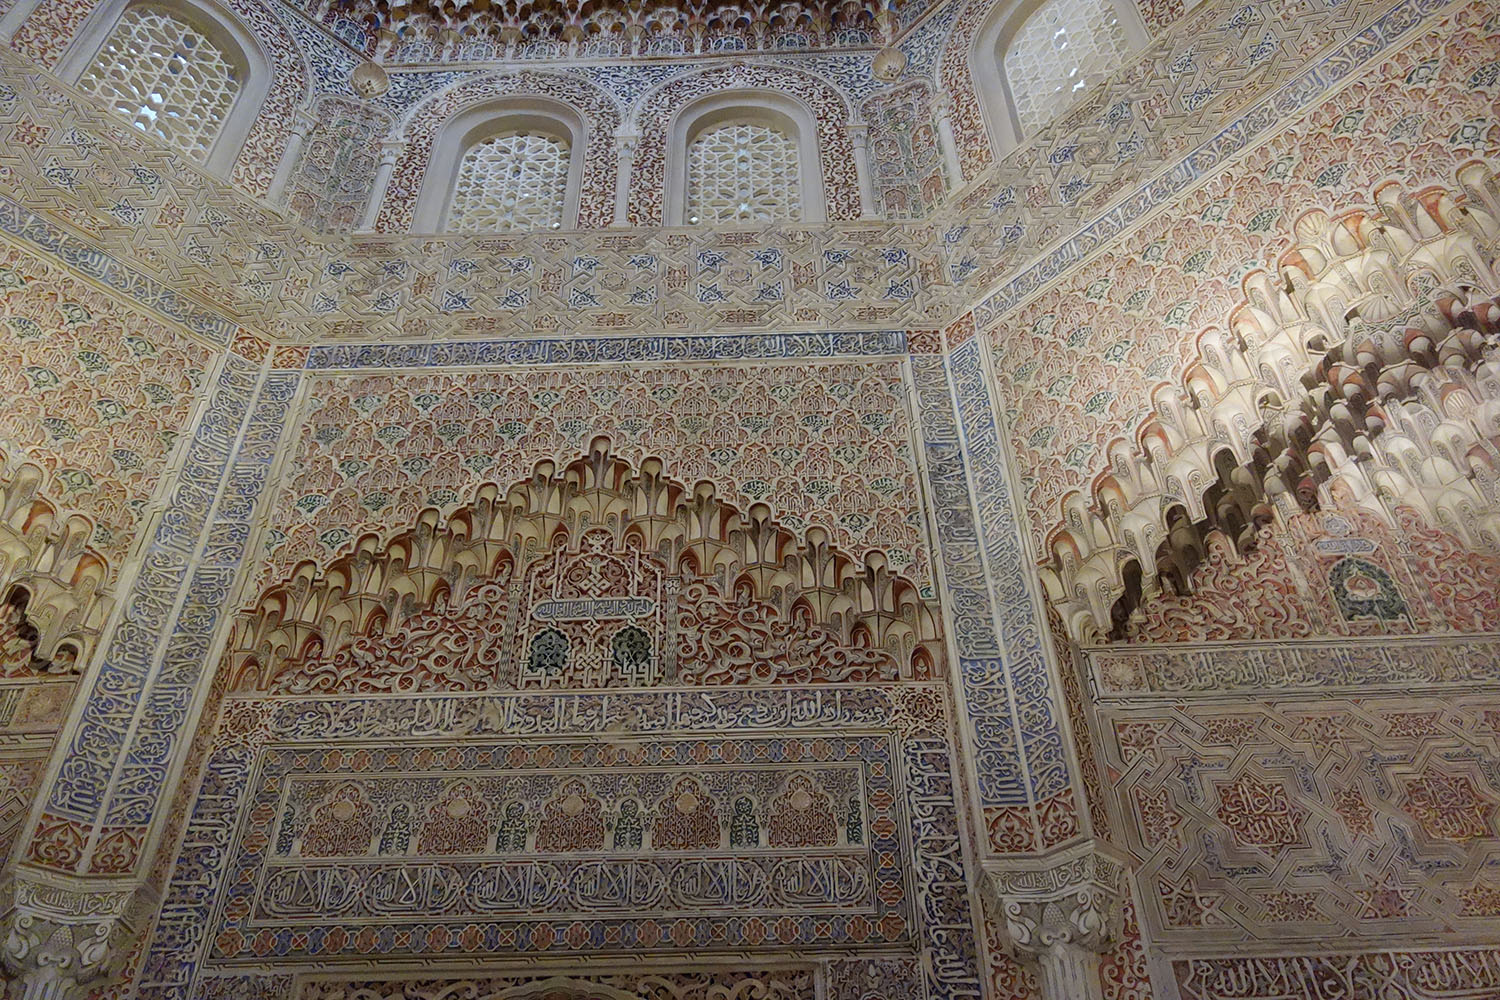 Interior detail view of stucco decorations